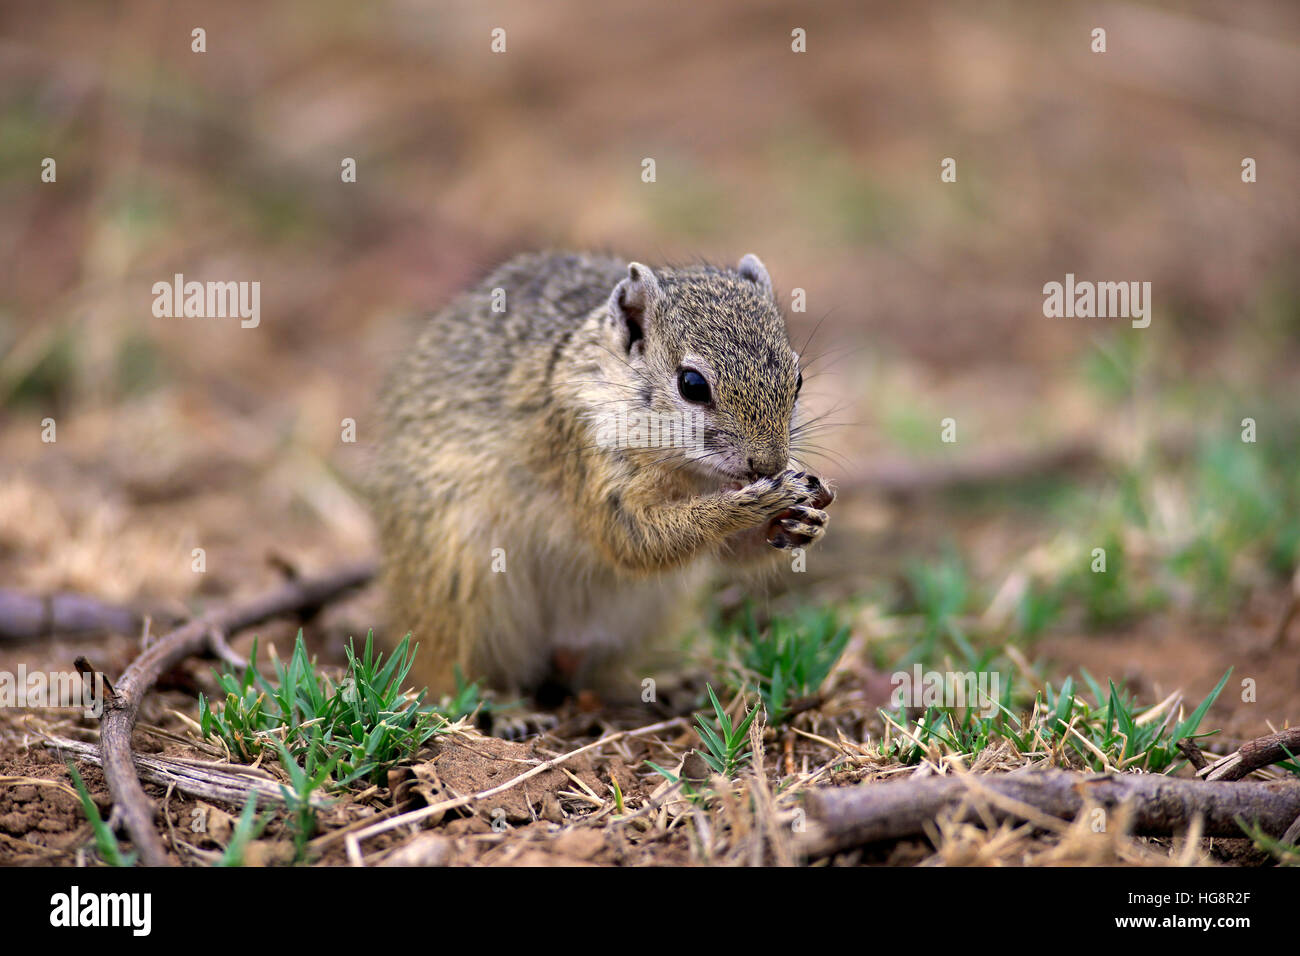 Tree Squirrel, Smith's bush squirrel, yellow-footed squirrel, (Paraxerus cepapi), adult feeding, Kruger Nationalpark, South Africa, Africa Stock Photo